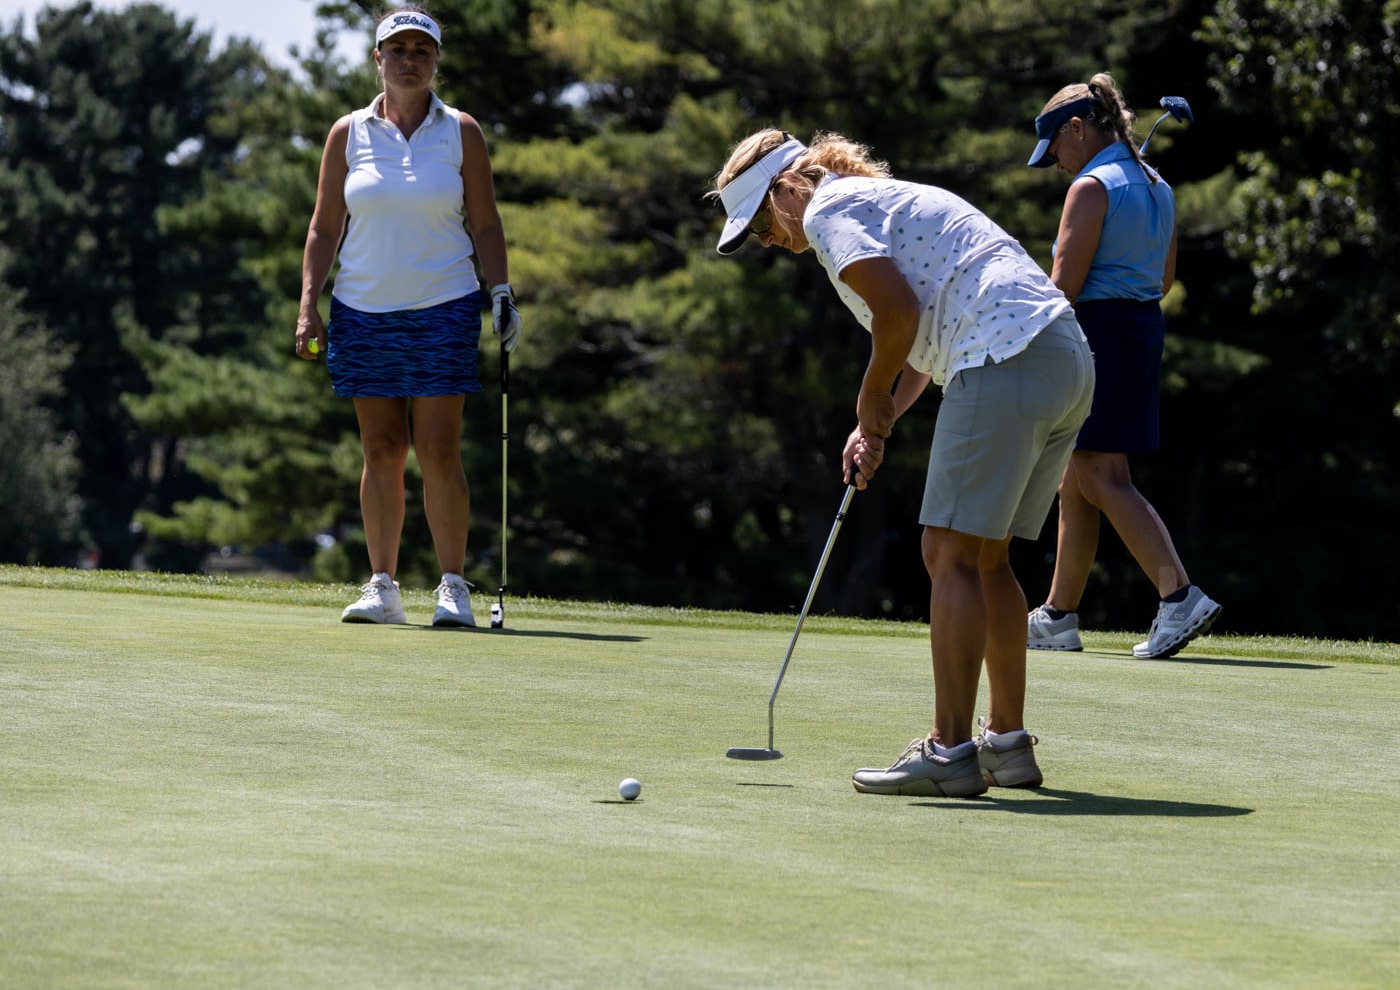 Country-Club-Of-New-Bedford FB-2023-Womens-FB-Gallery August-2023-Country-Club-Of-New-Bedford-FB-2023-Womens-FB-Gallery August-2023-Womens-FB-Gallery-Thursday-Photos-Image-40